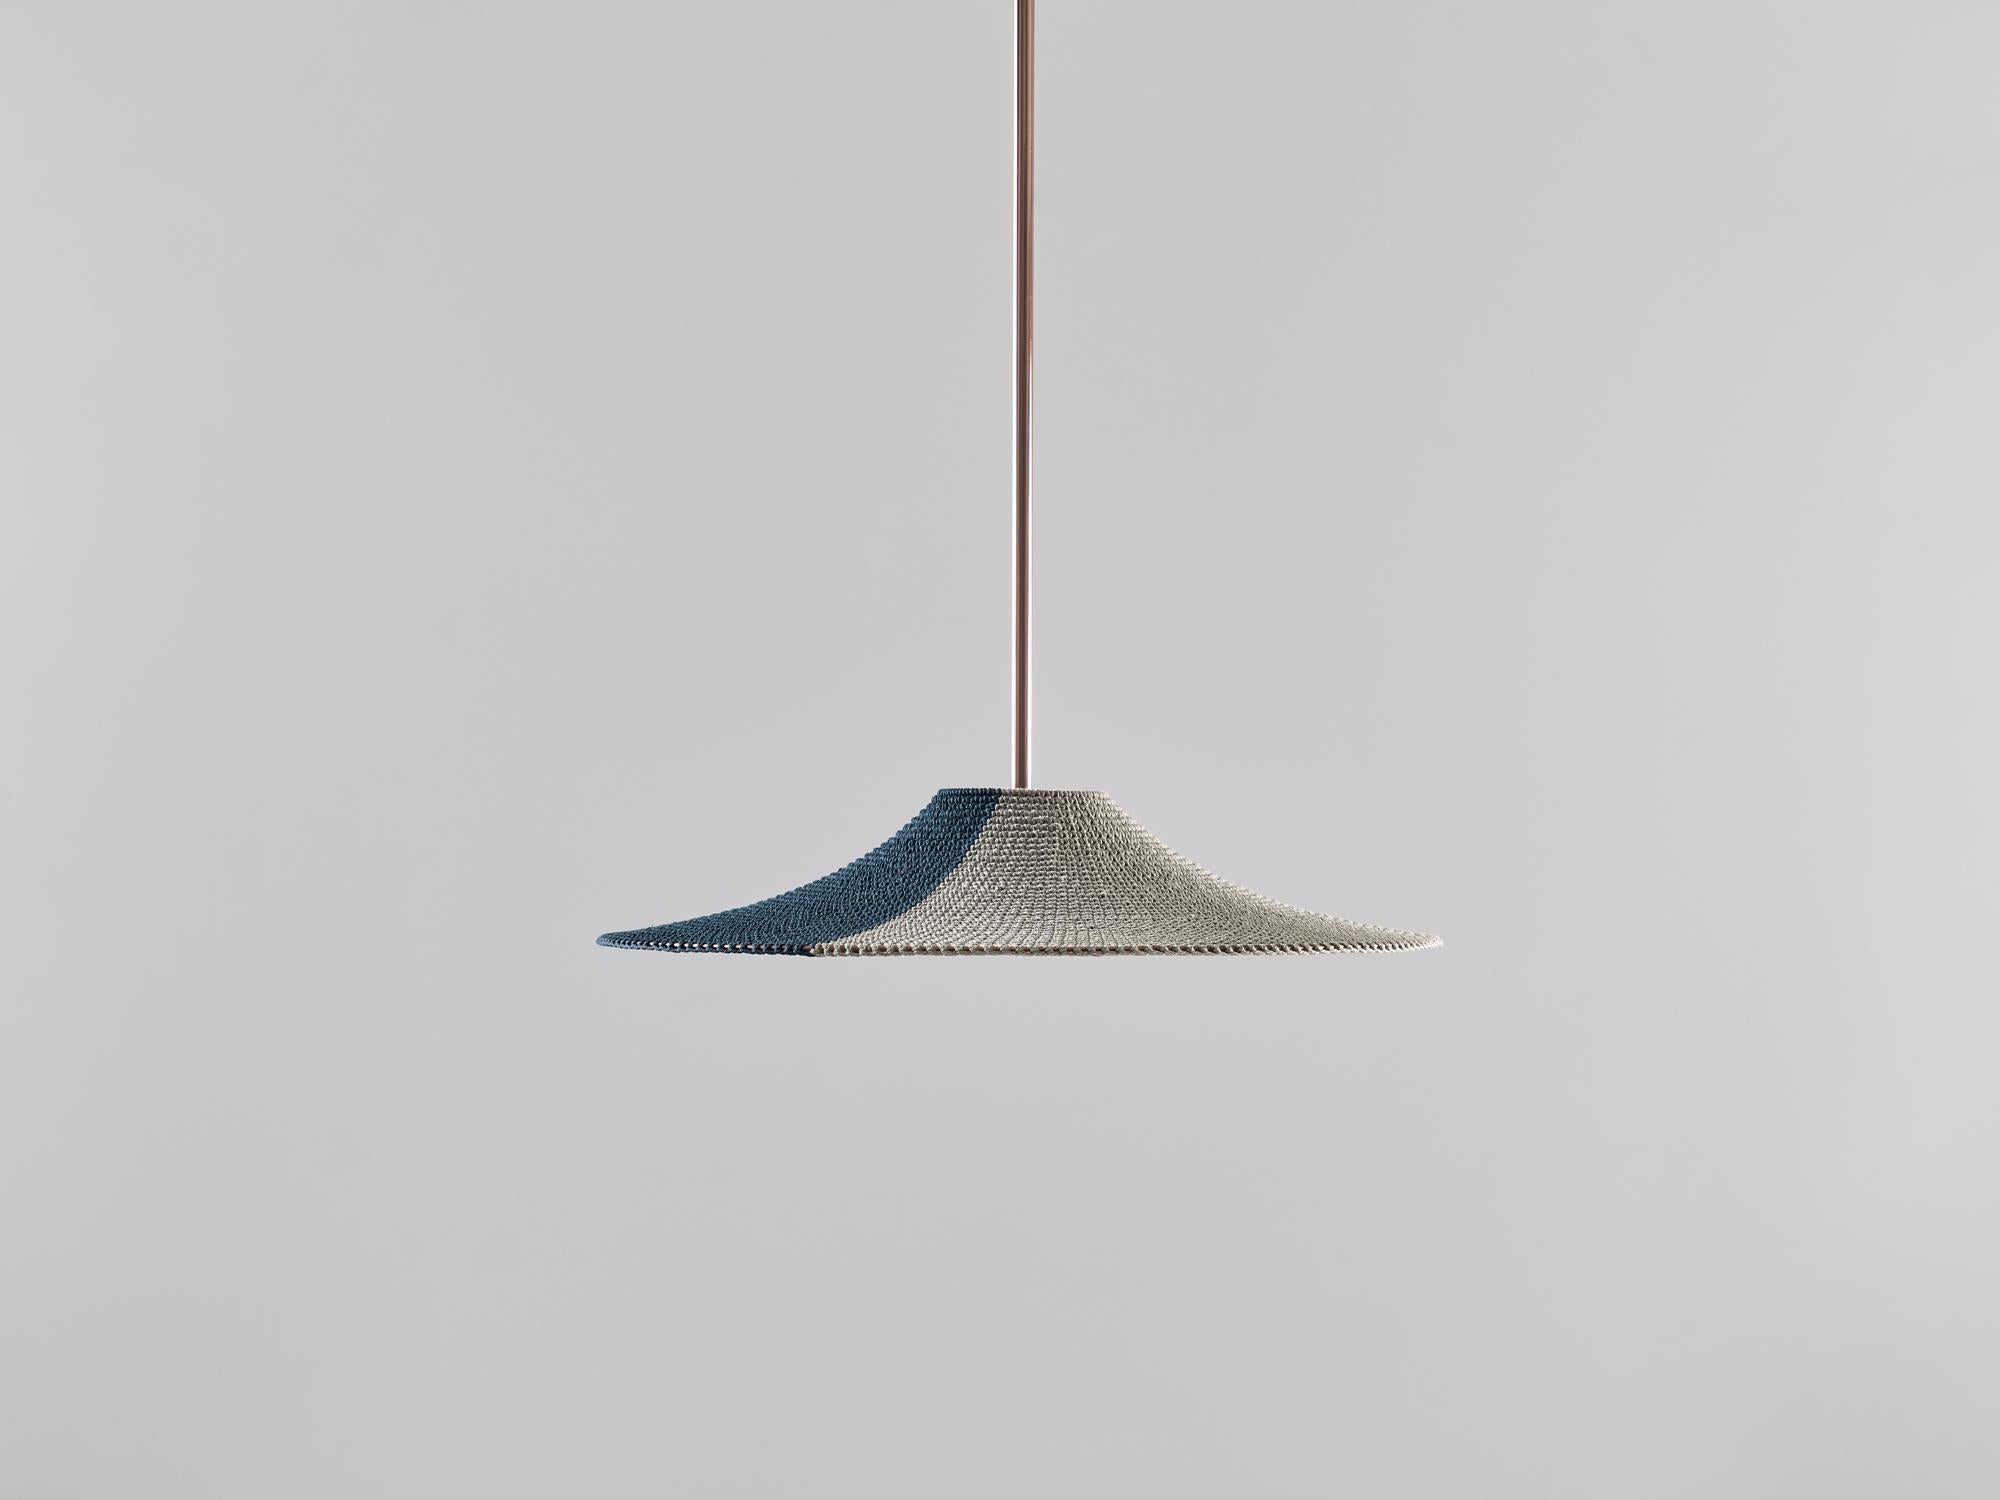 Small simple shade 01 50/50 pendant lamp by Naomi Paul.
Dimensions: D 50 x H 8 cm.
Materials: metal frame, Egyptian cotton cord.
Colors: Deepsea and Putty.
Available in other colors and in 3 sizes: D50, D60, D80 cm.
Available in plain, 50/50,